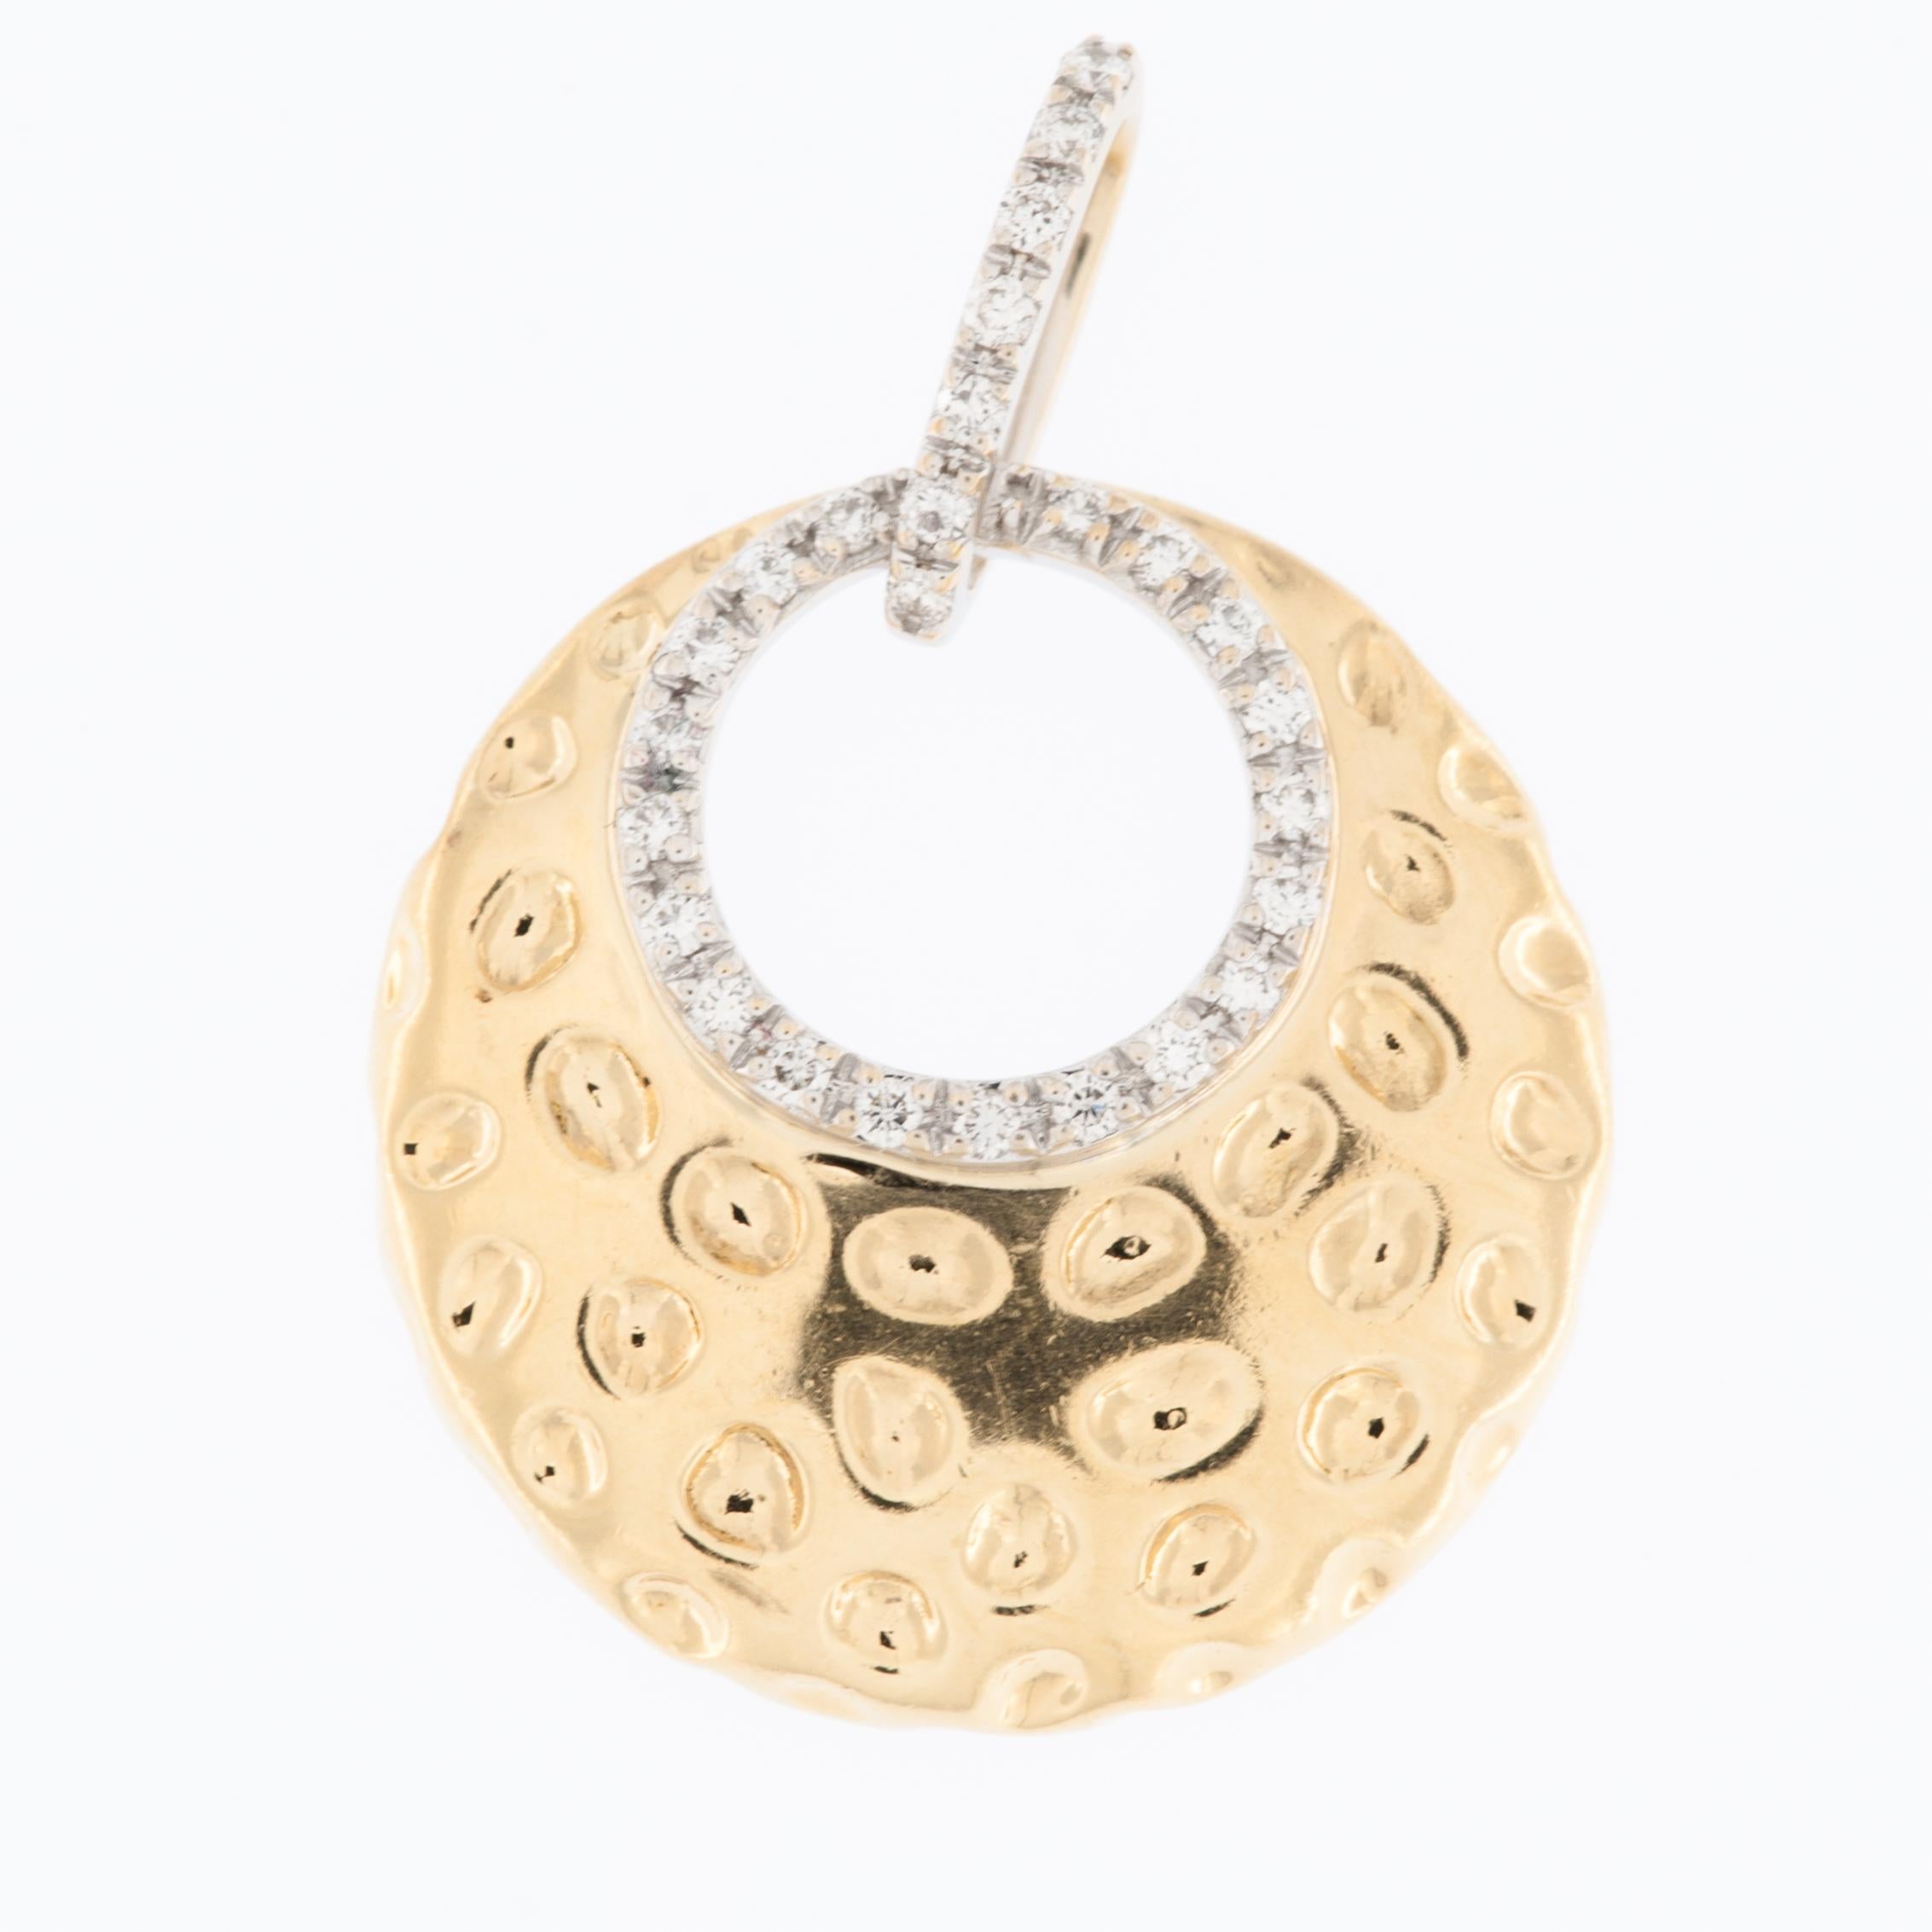 This exquisite Hand-Made Pendant is made from 18kt yellow and white Gold and it's adorned with dazzling diamonds. The lustrous 18-karat gold, known for its timeless elegance and enduring value, serves as the canvas for this breathtaking piece of